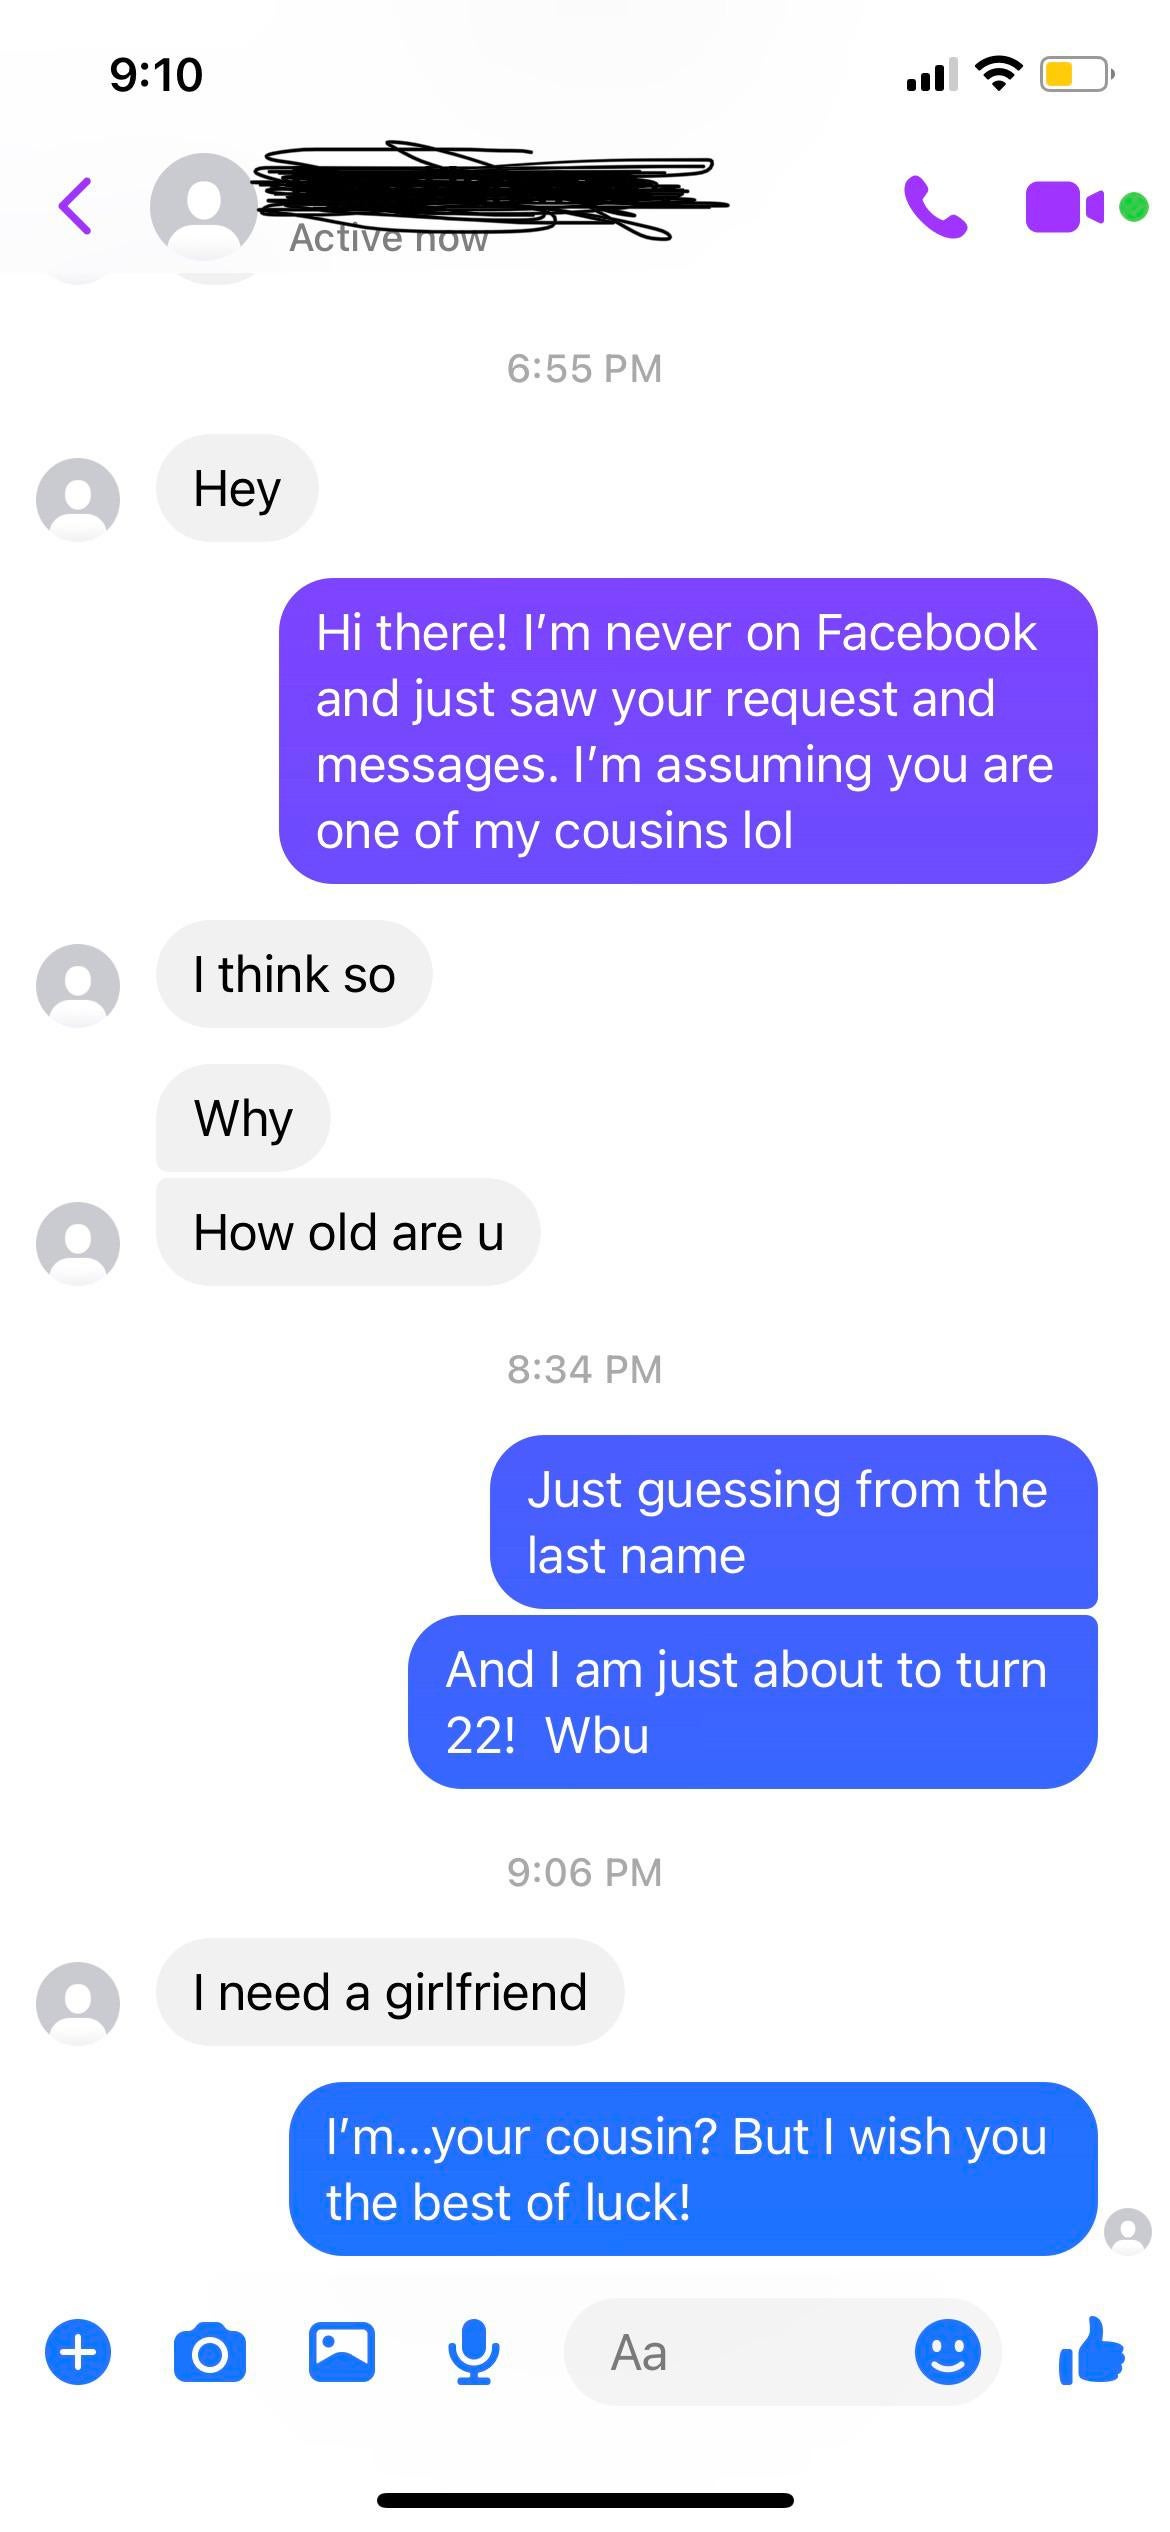 cringe posts - screenshot - Active now Hey Hi there! I'm never on Facebook and just saw your request and messages. I'm assuming you are one of my cousins lol I think so Why How old are u Just guessing from the last name And I am just about to turn 22! Wbu